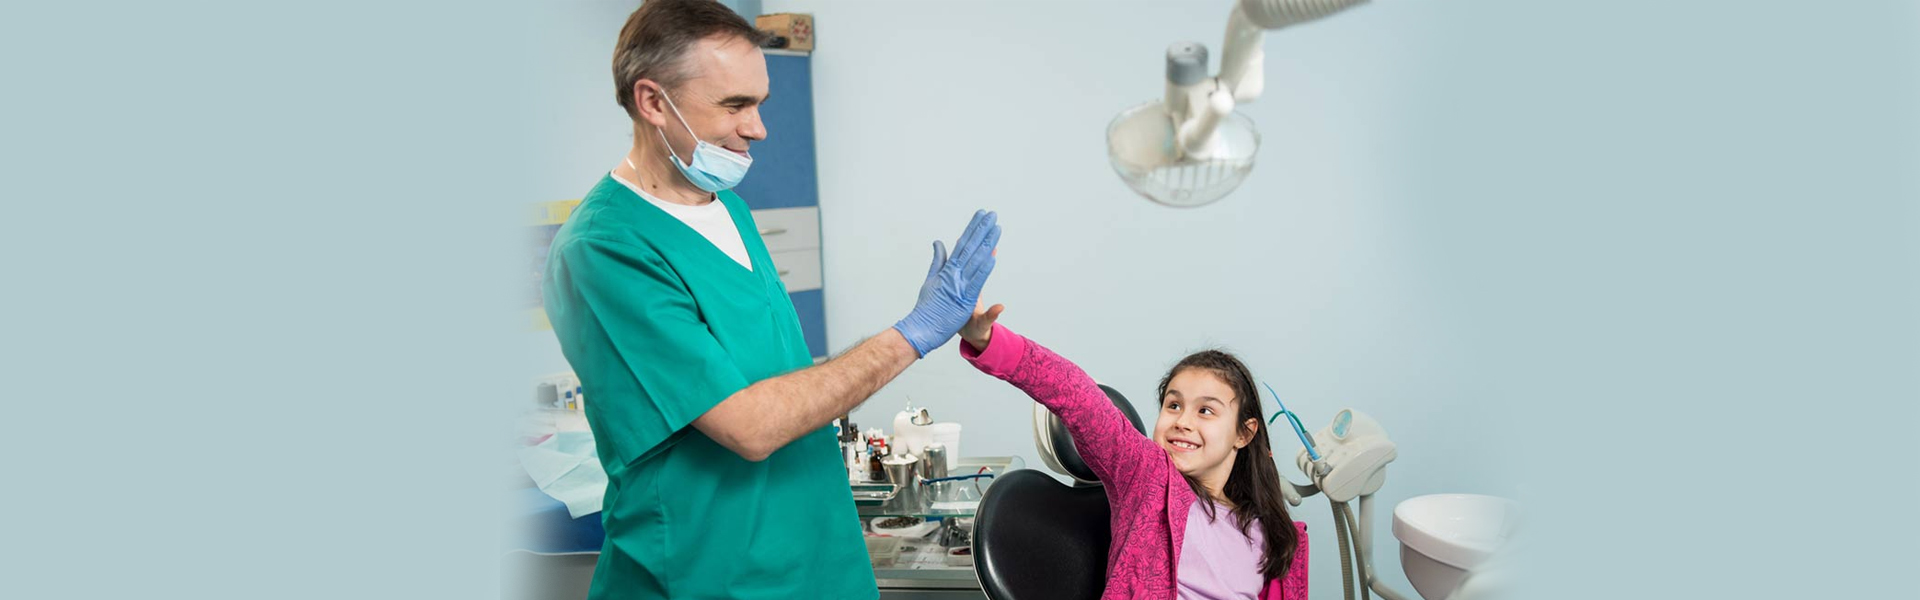 How To Choose the Best Hospital for Pediatric Emergency Dentistry